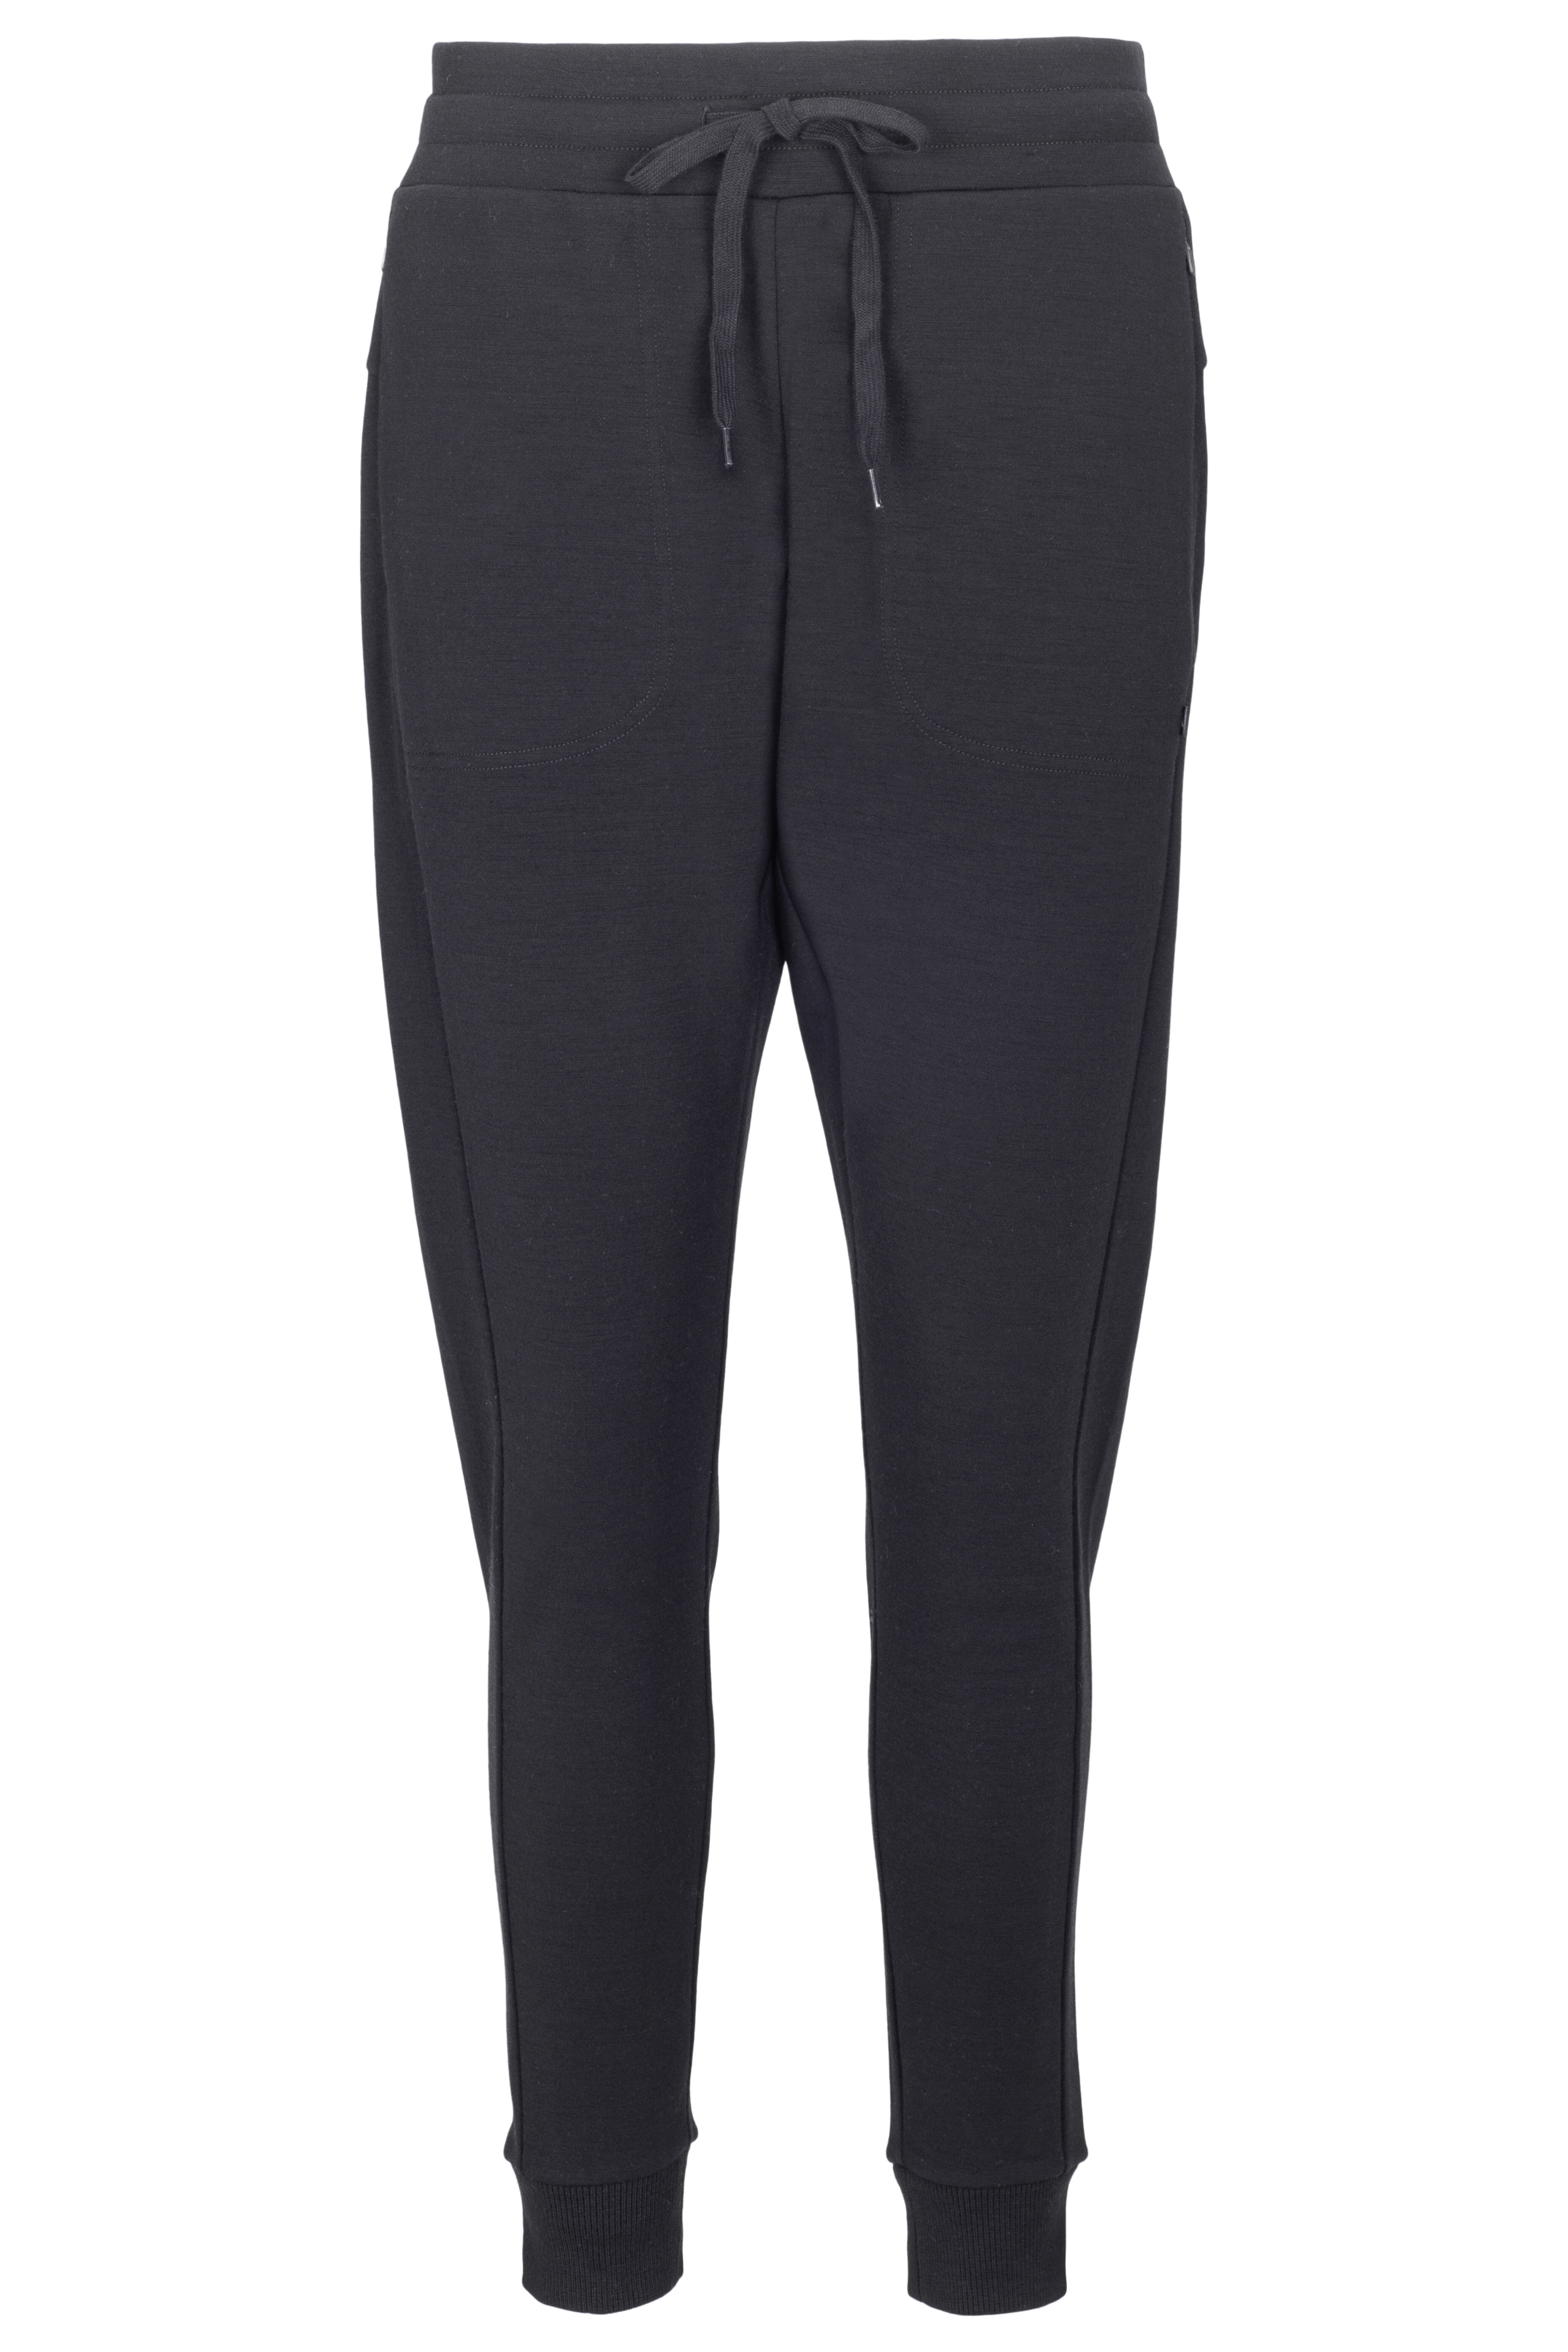 Women's Heritage Stand Up® Pants - Patagonia New Zealand